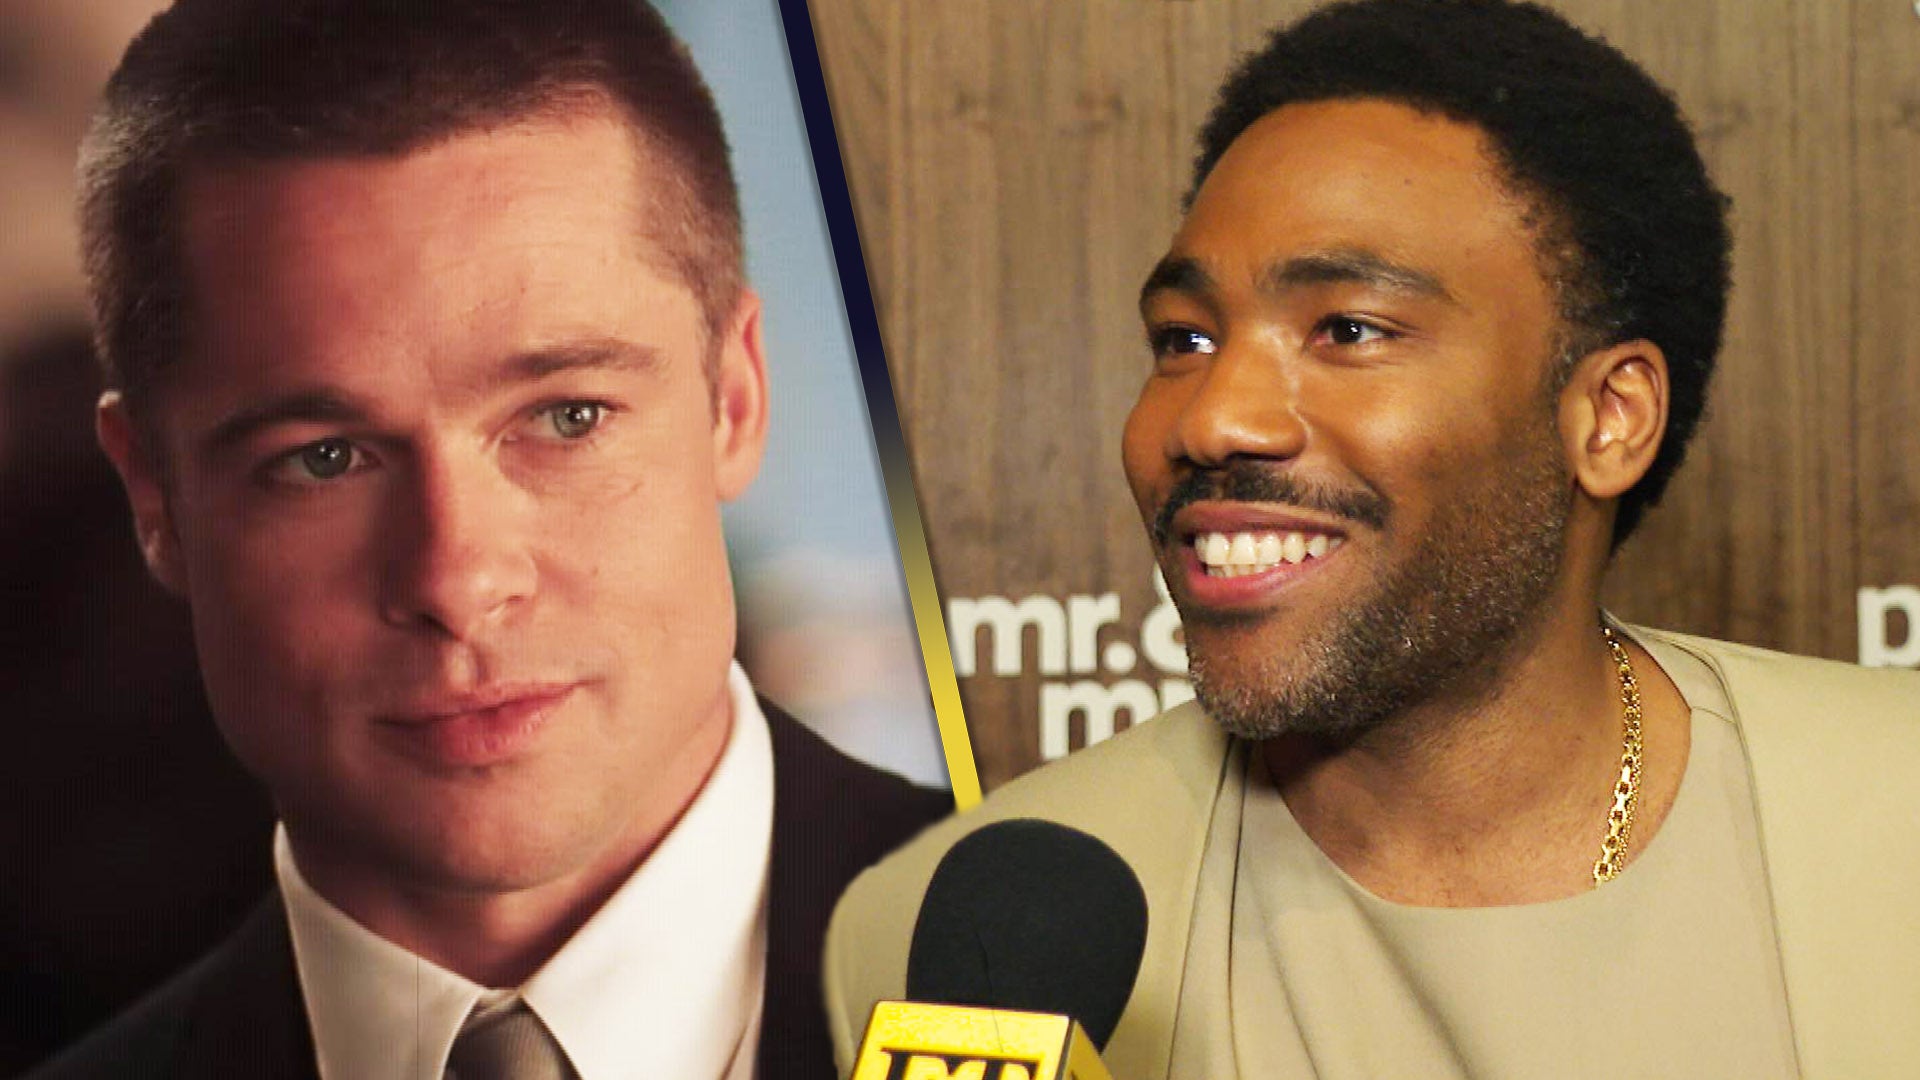 Donald Glover on How Brad Pitt 'Charmed His Way Out of' Giving ‘Mr. & Mrs. Smith’ Advice (Exclusive)